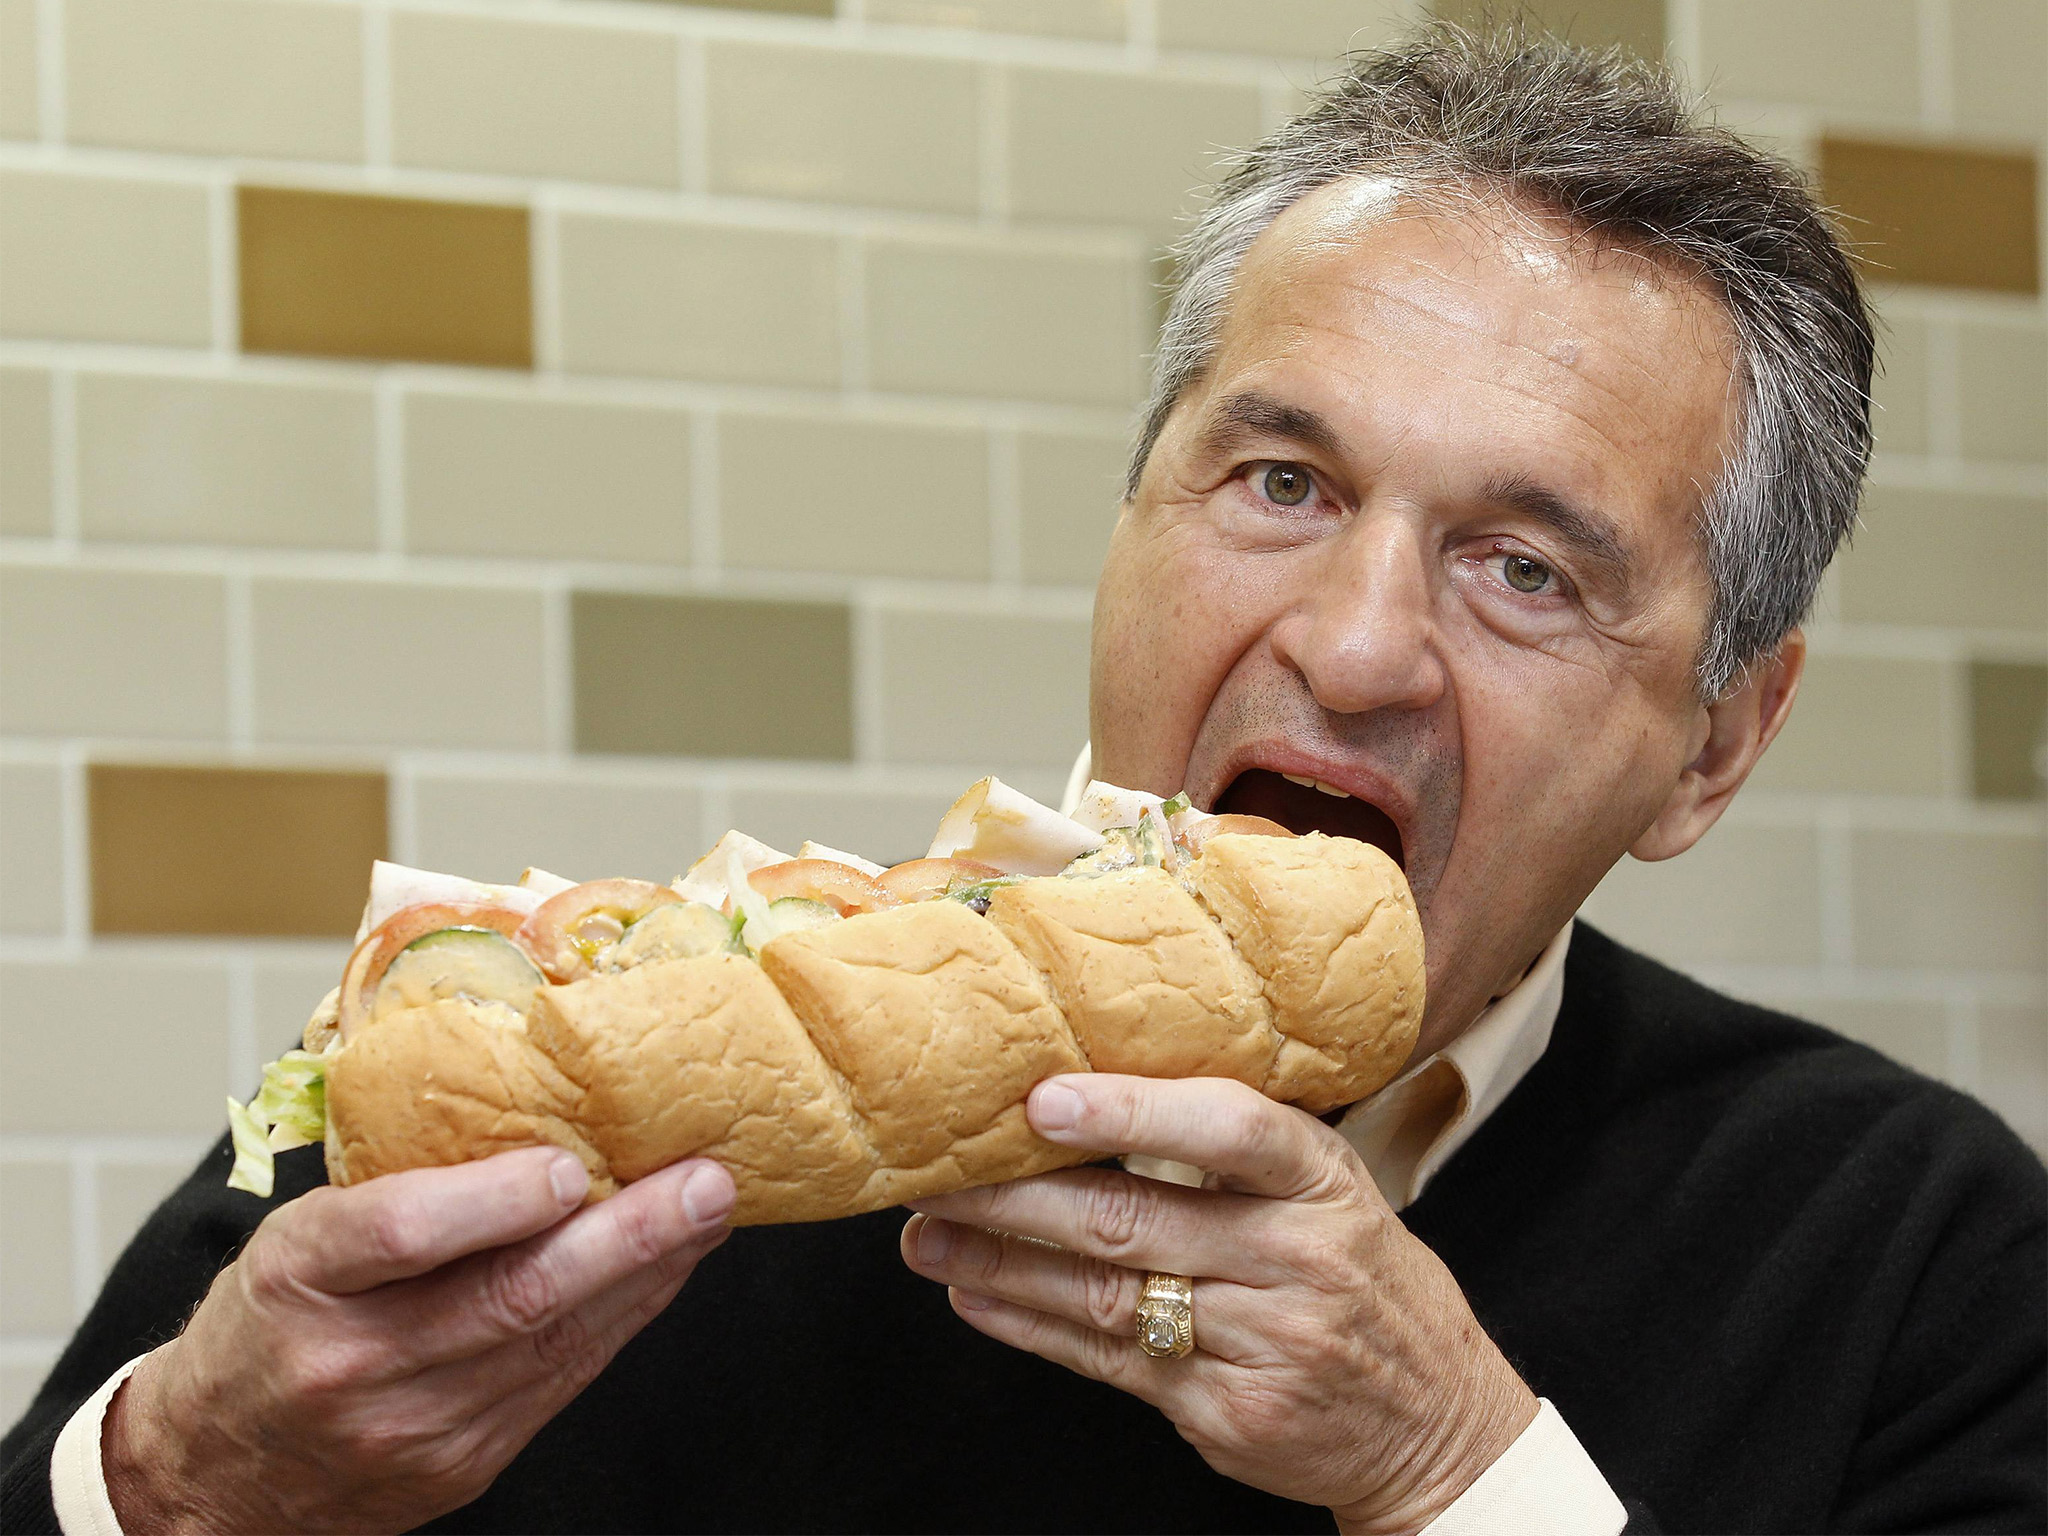 You got: 62! Build a Subway Sandwich and We’ll Guess Your Age